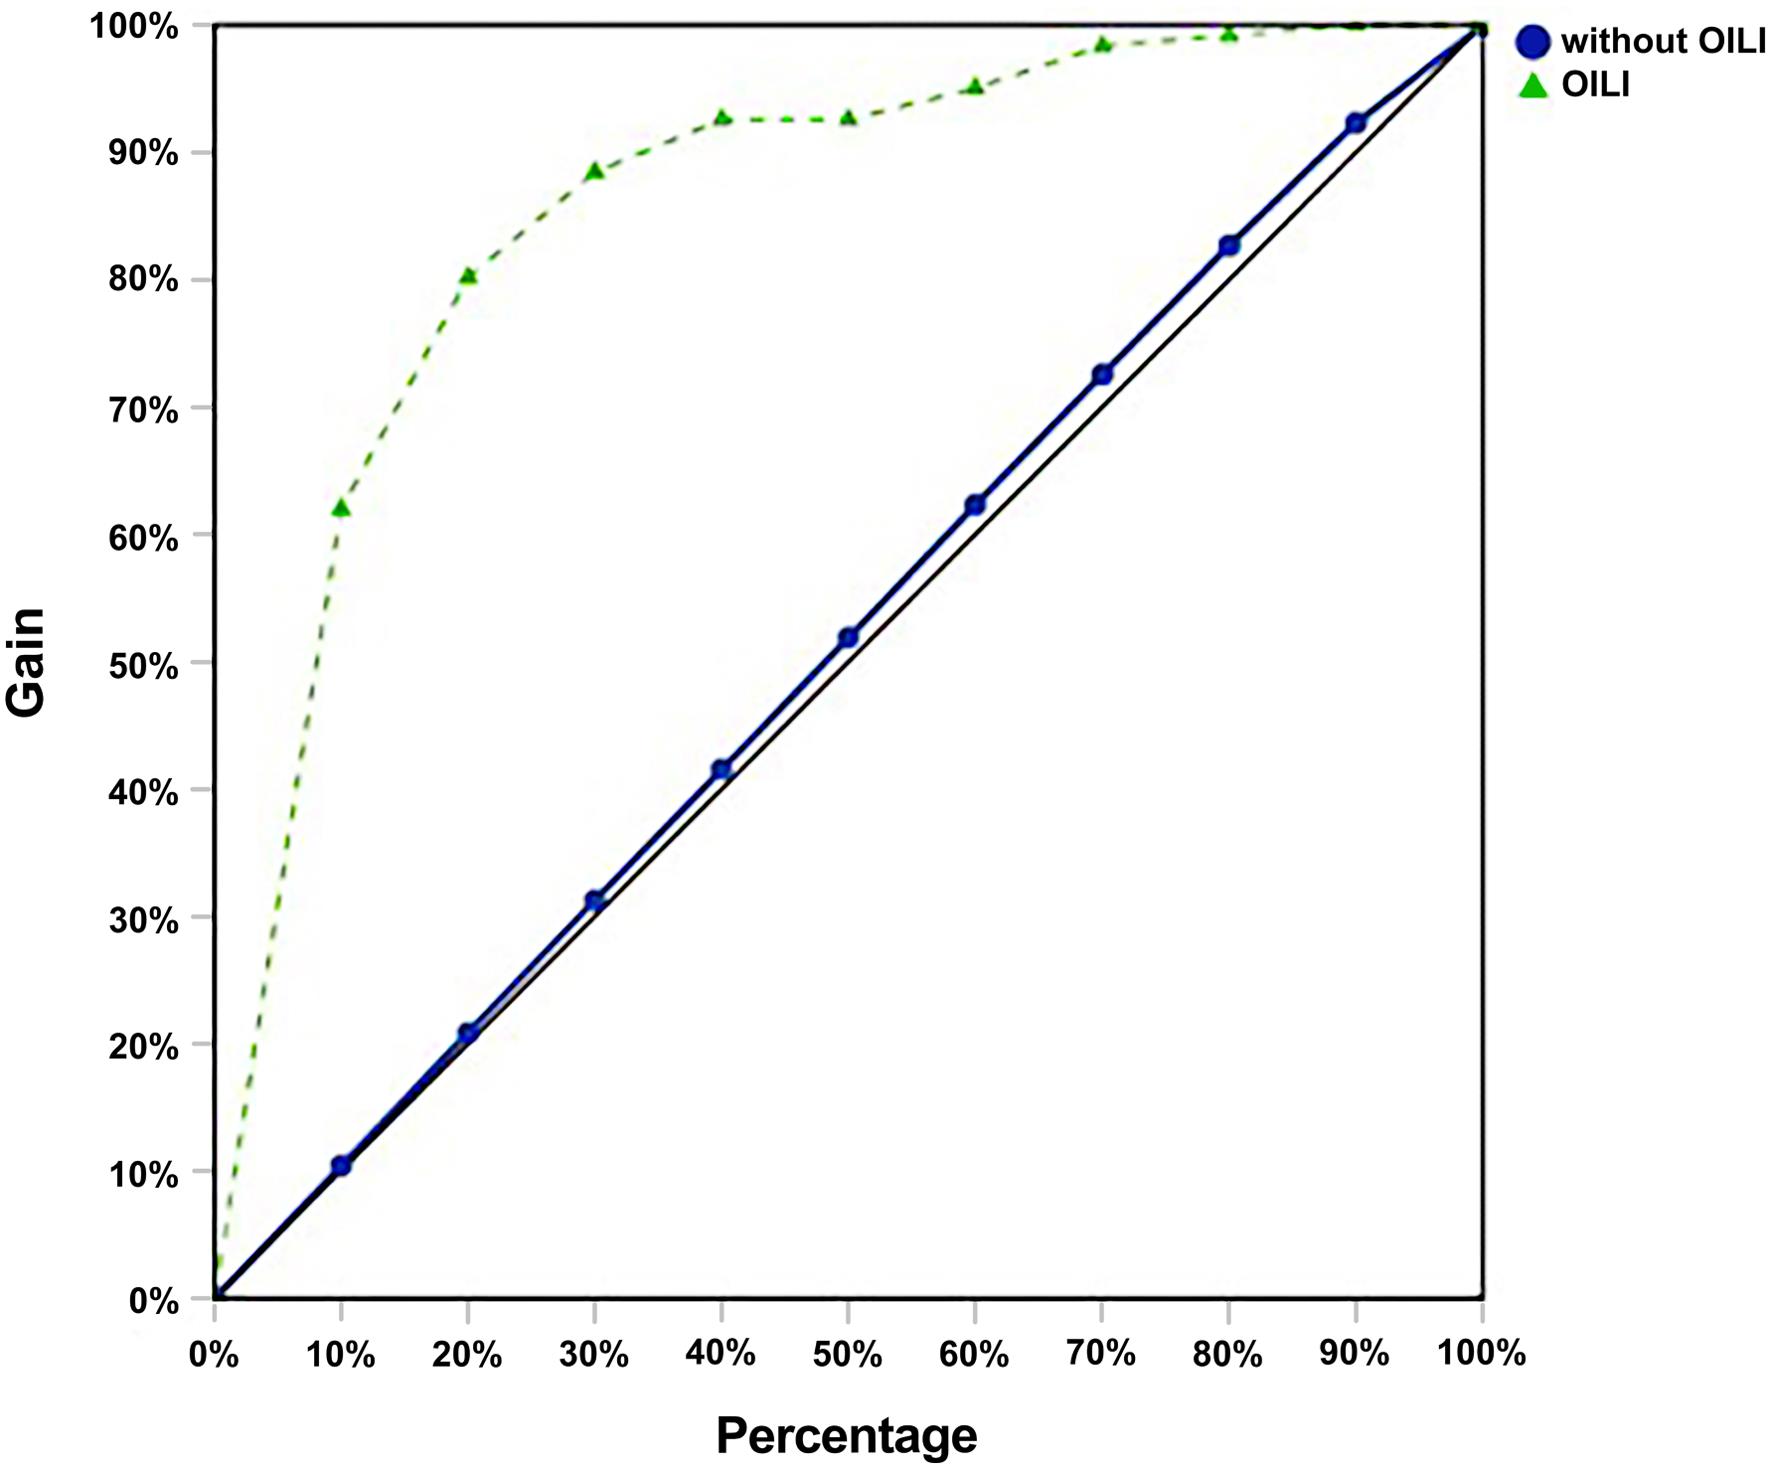 Cumulative gains of the ANN model for predicting the risk of OILI.